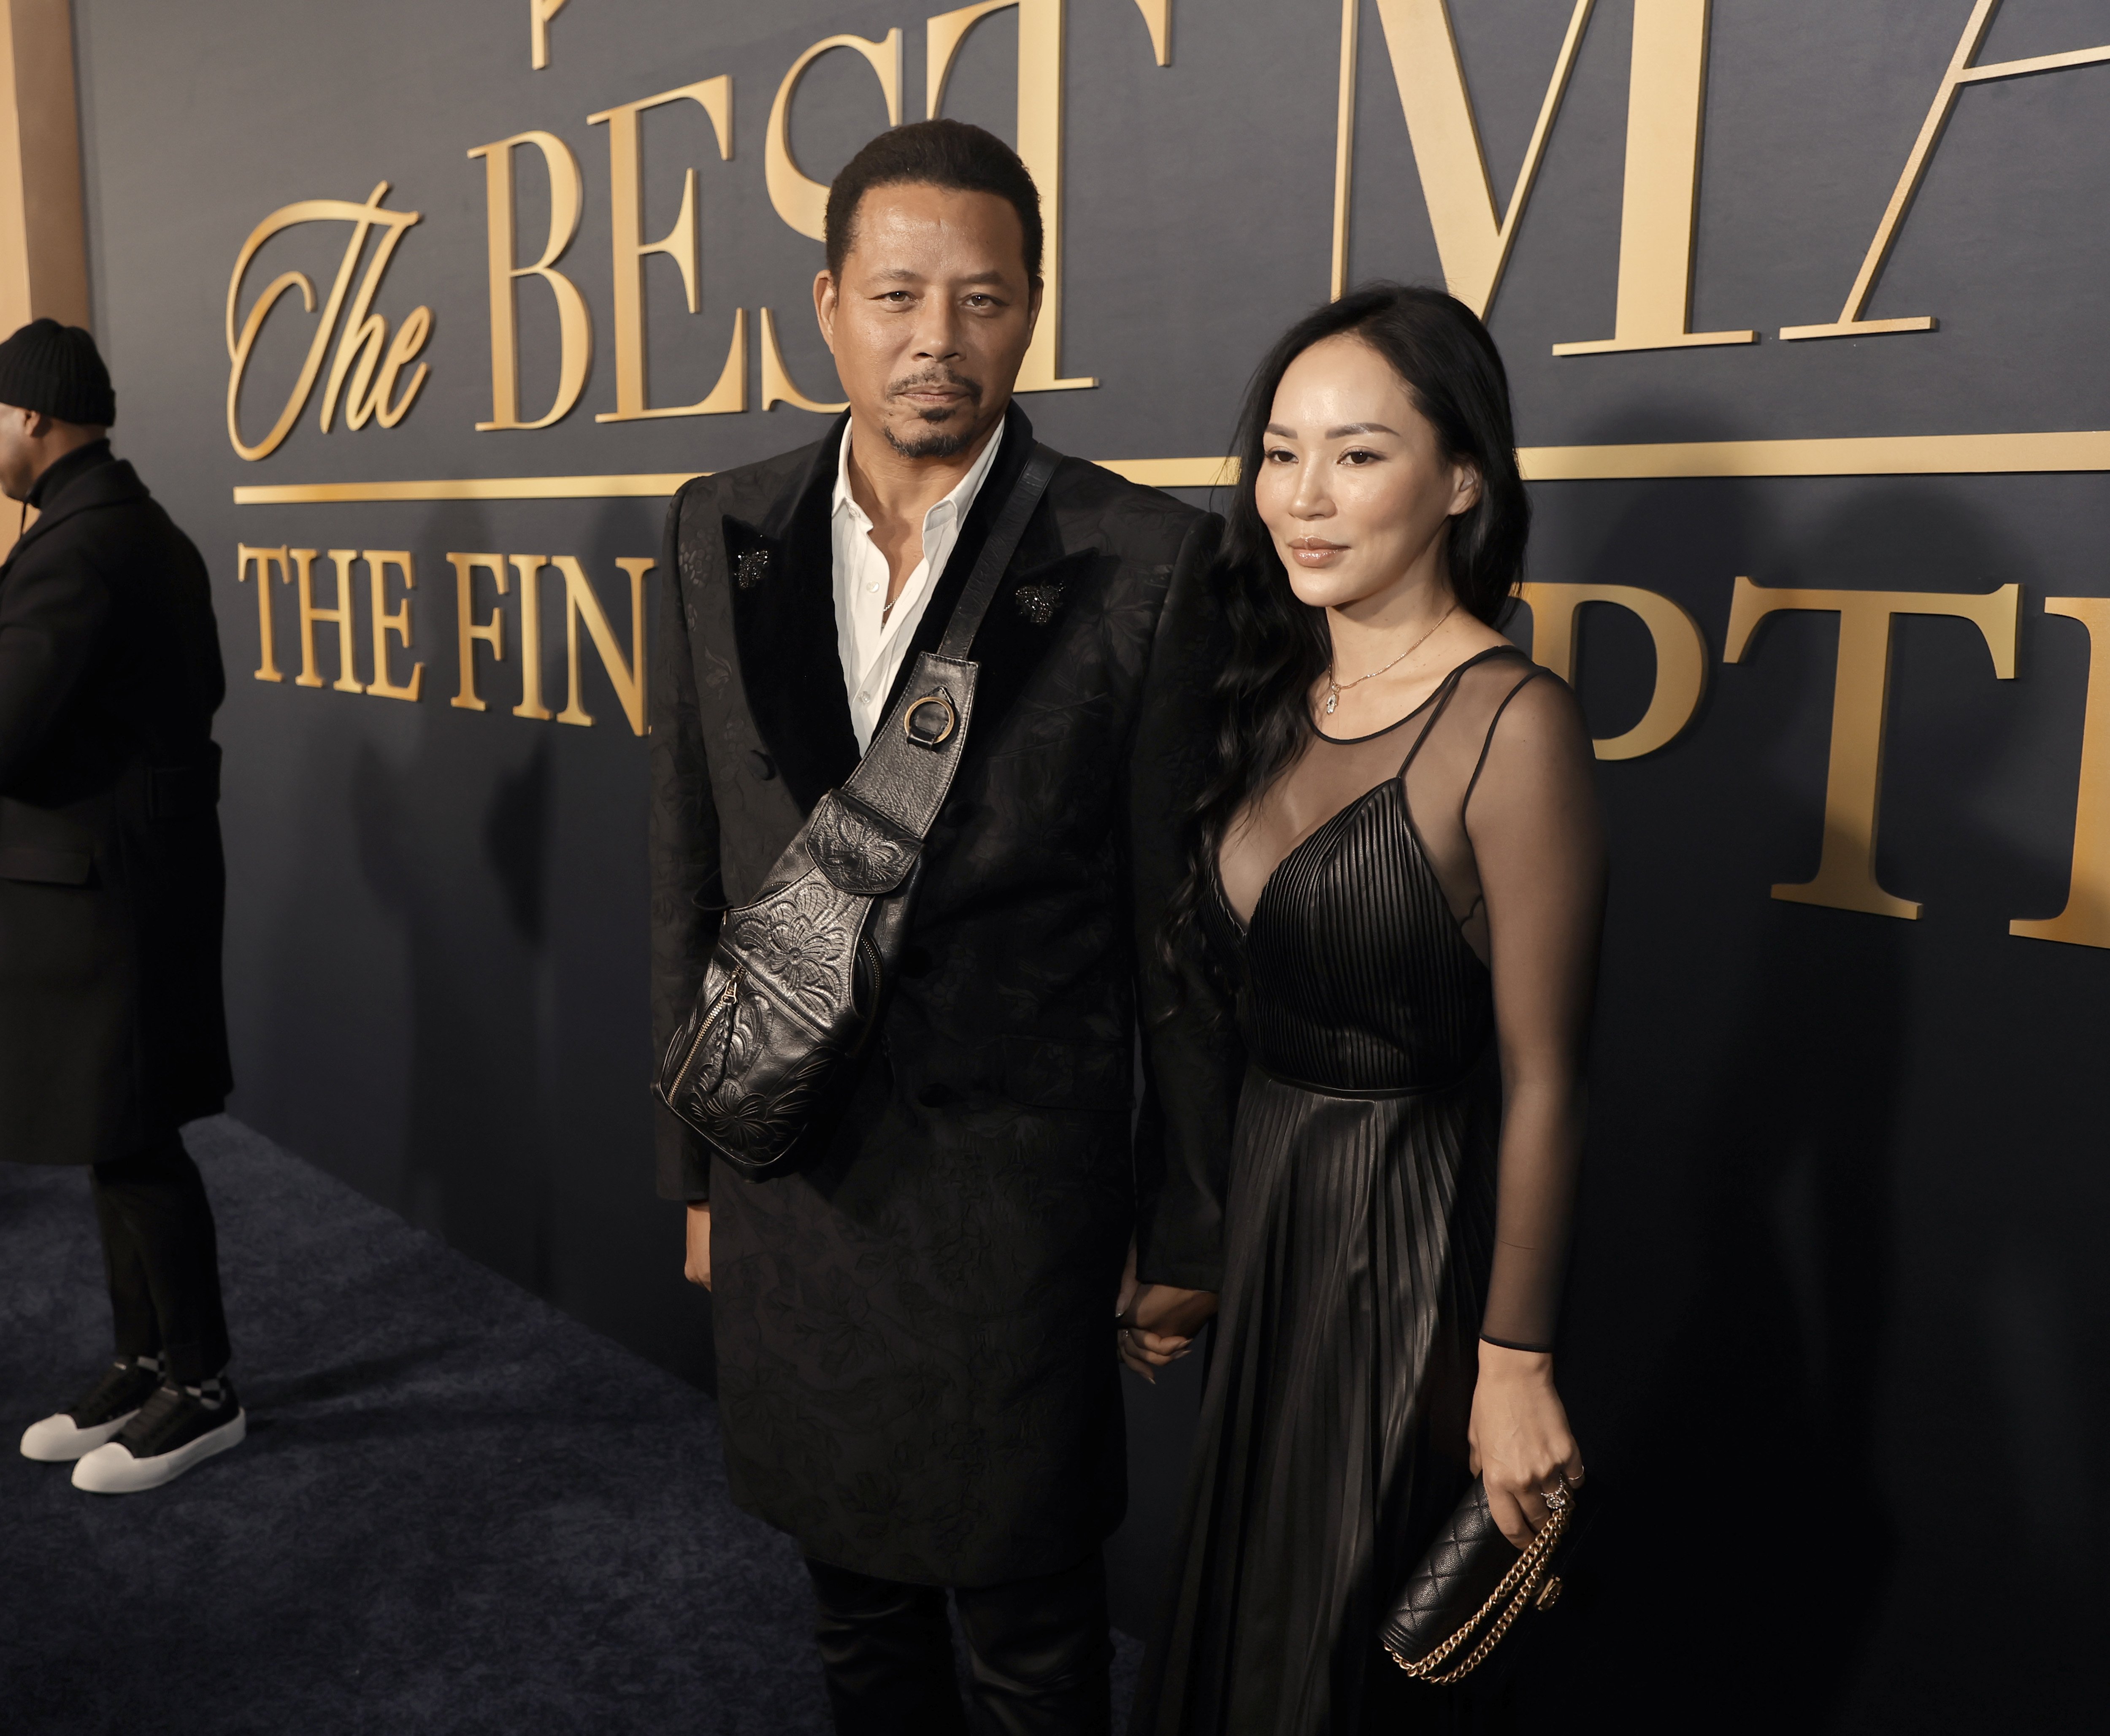 Terrence Howard and Mira Pak Howard attend Peacock's "The Best Man: The Final Chapters" premiere event at Hollywood Athletic Club, on December 7, 2022, in Hollywood, California. | Source: Getty Images